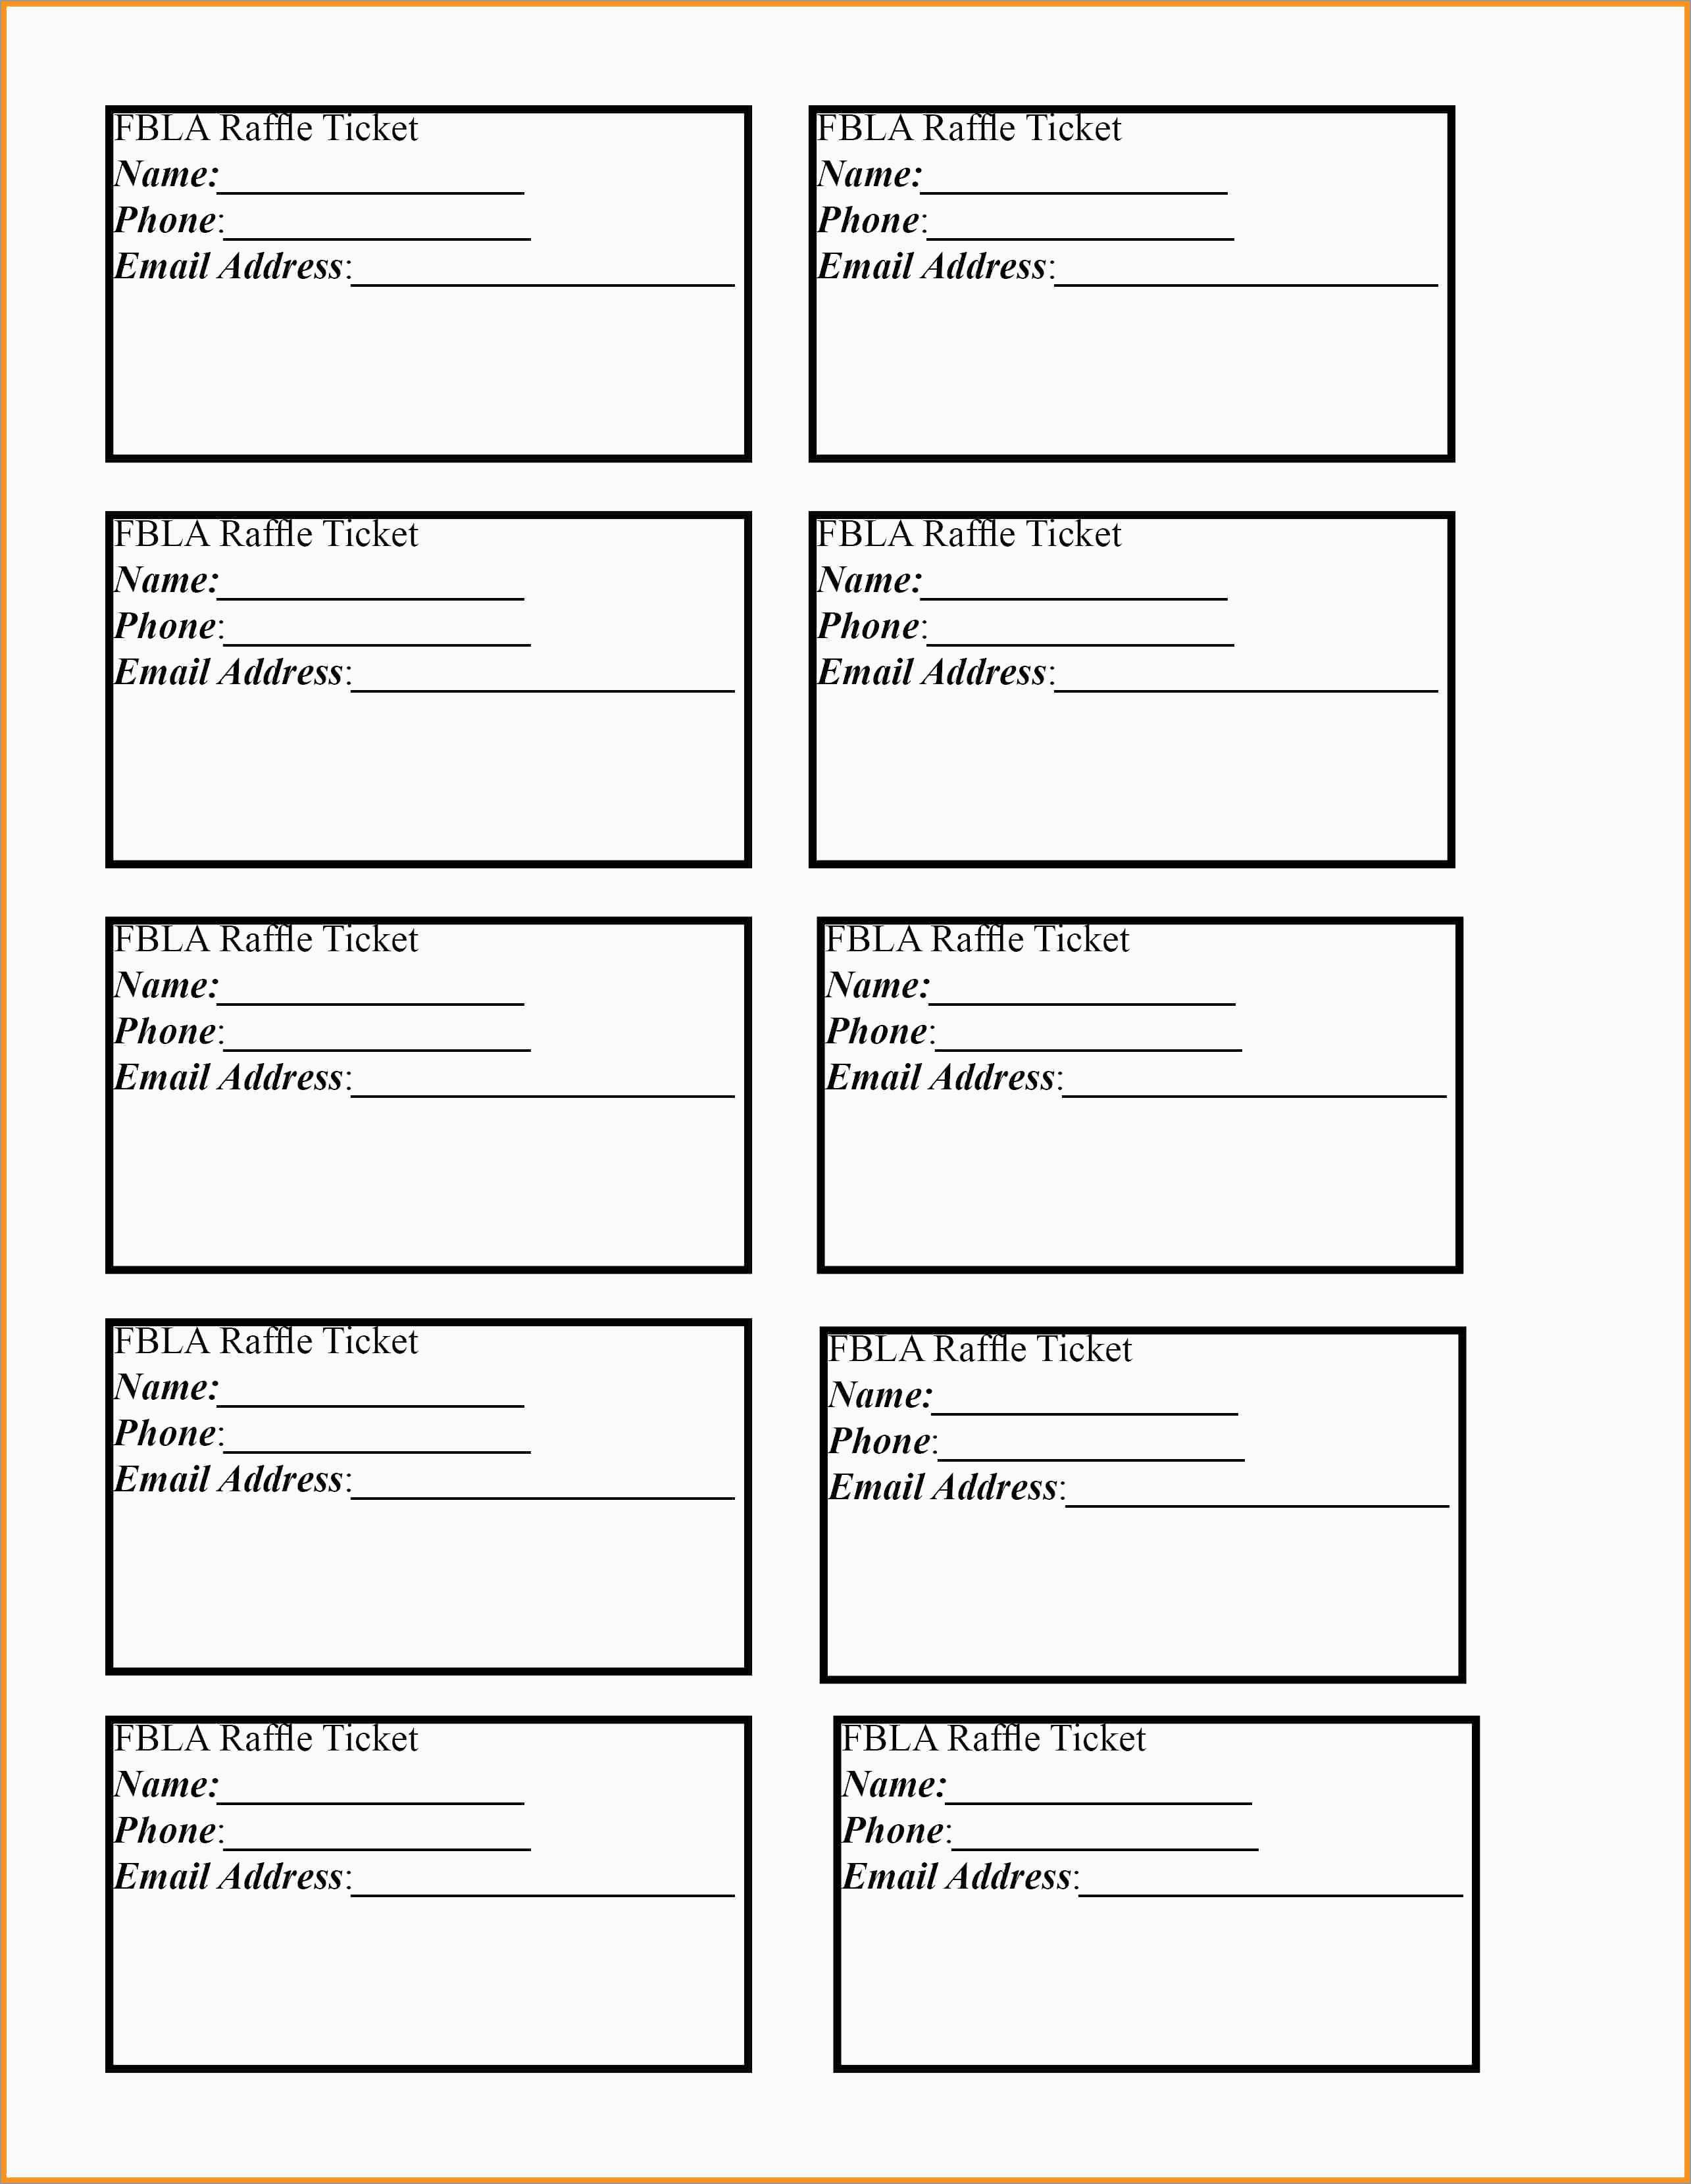 Free Printable Raffle Ticket Template Download Lovely 6 Ticket - Free Printable Raffle Ticket Template Download